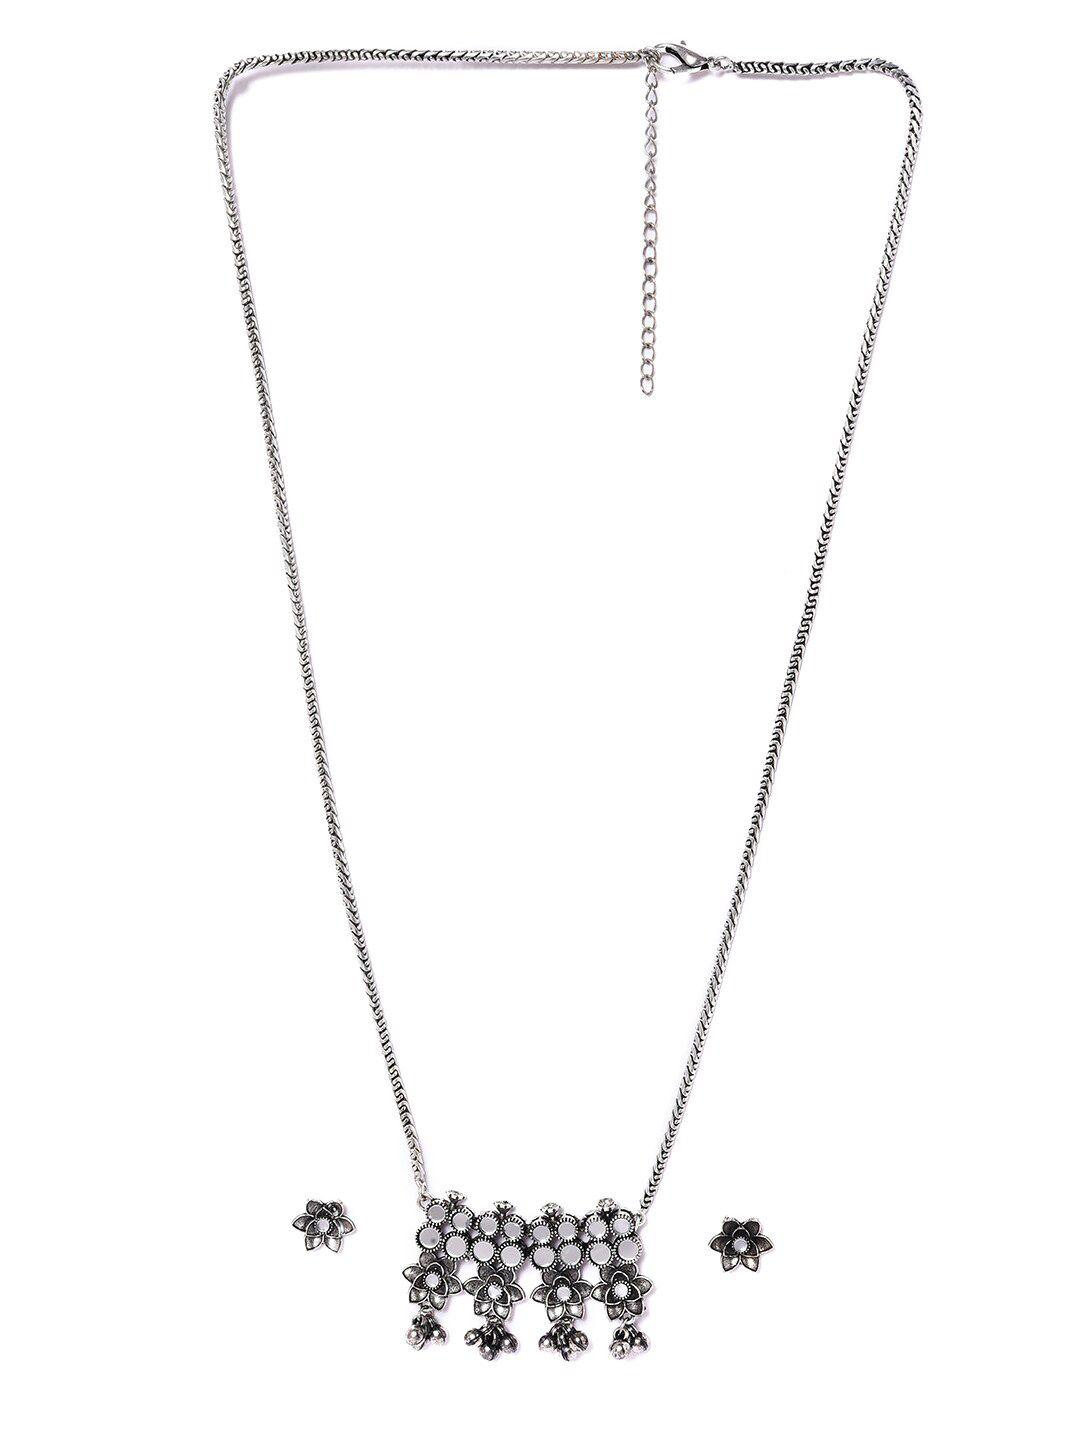 w silver-plated ad studded jewellery set